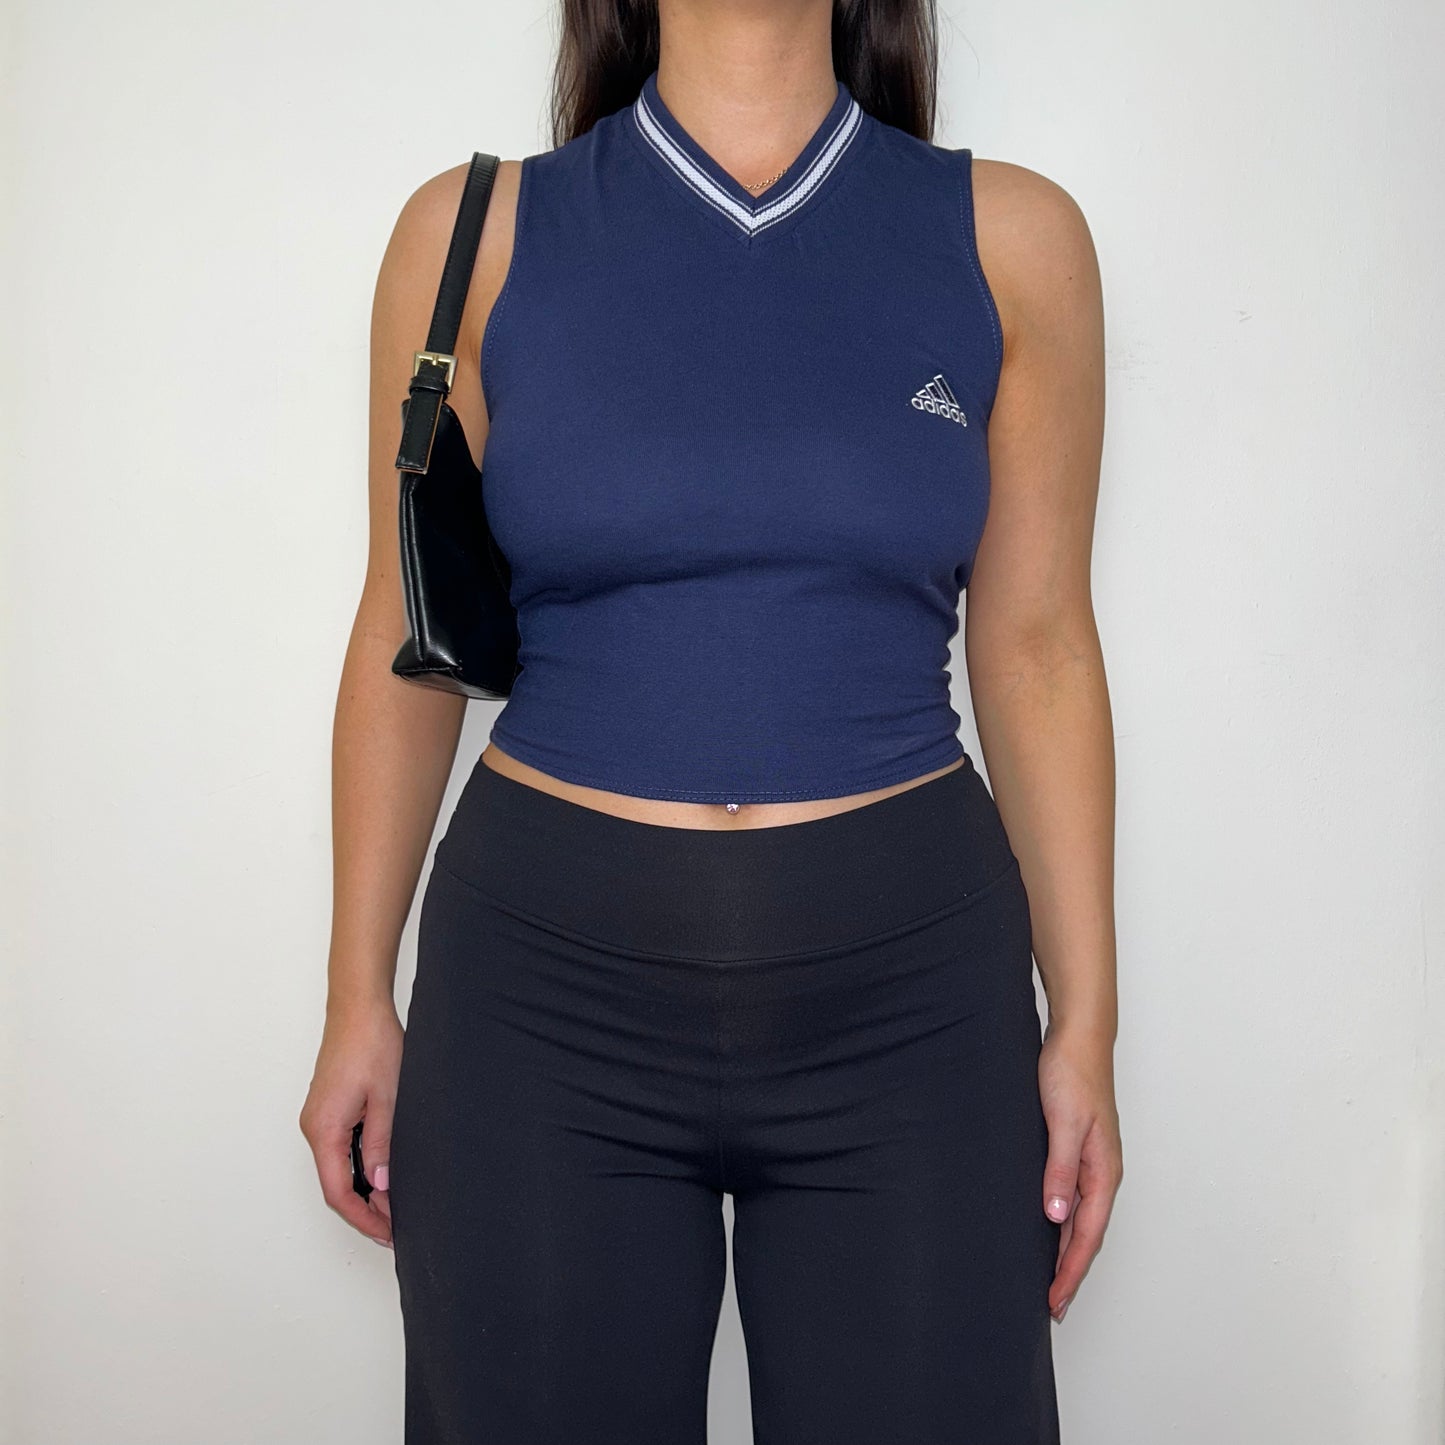 navy sleeveless crop top with white adidas logo shown on a model wearing black trousers and a black shoulder bag